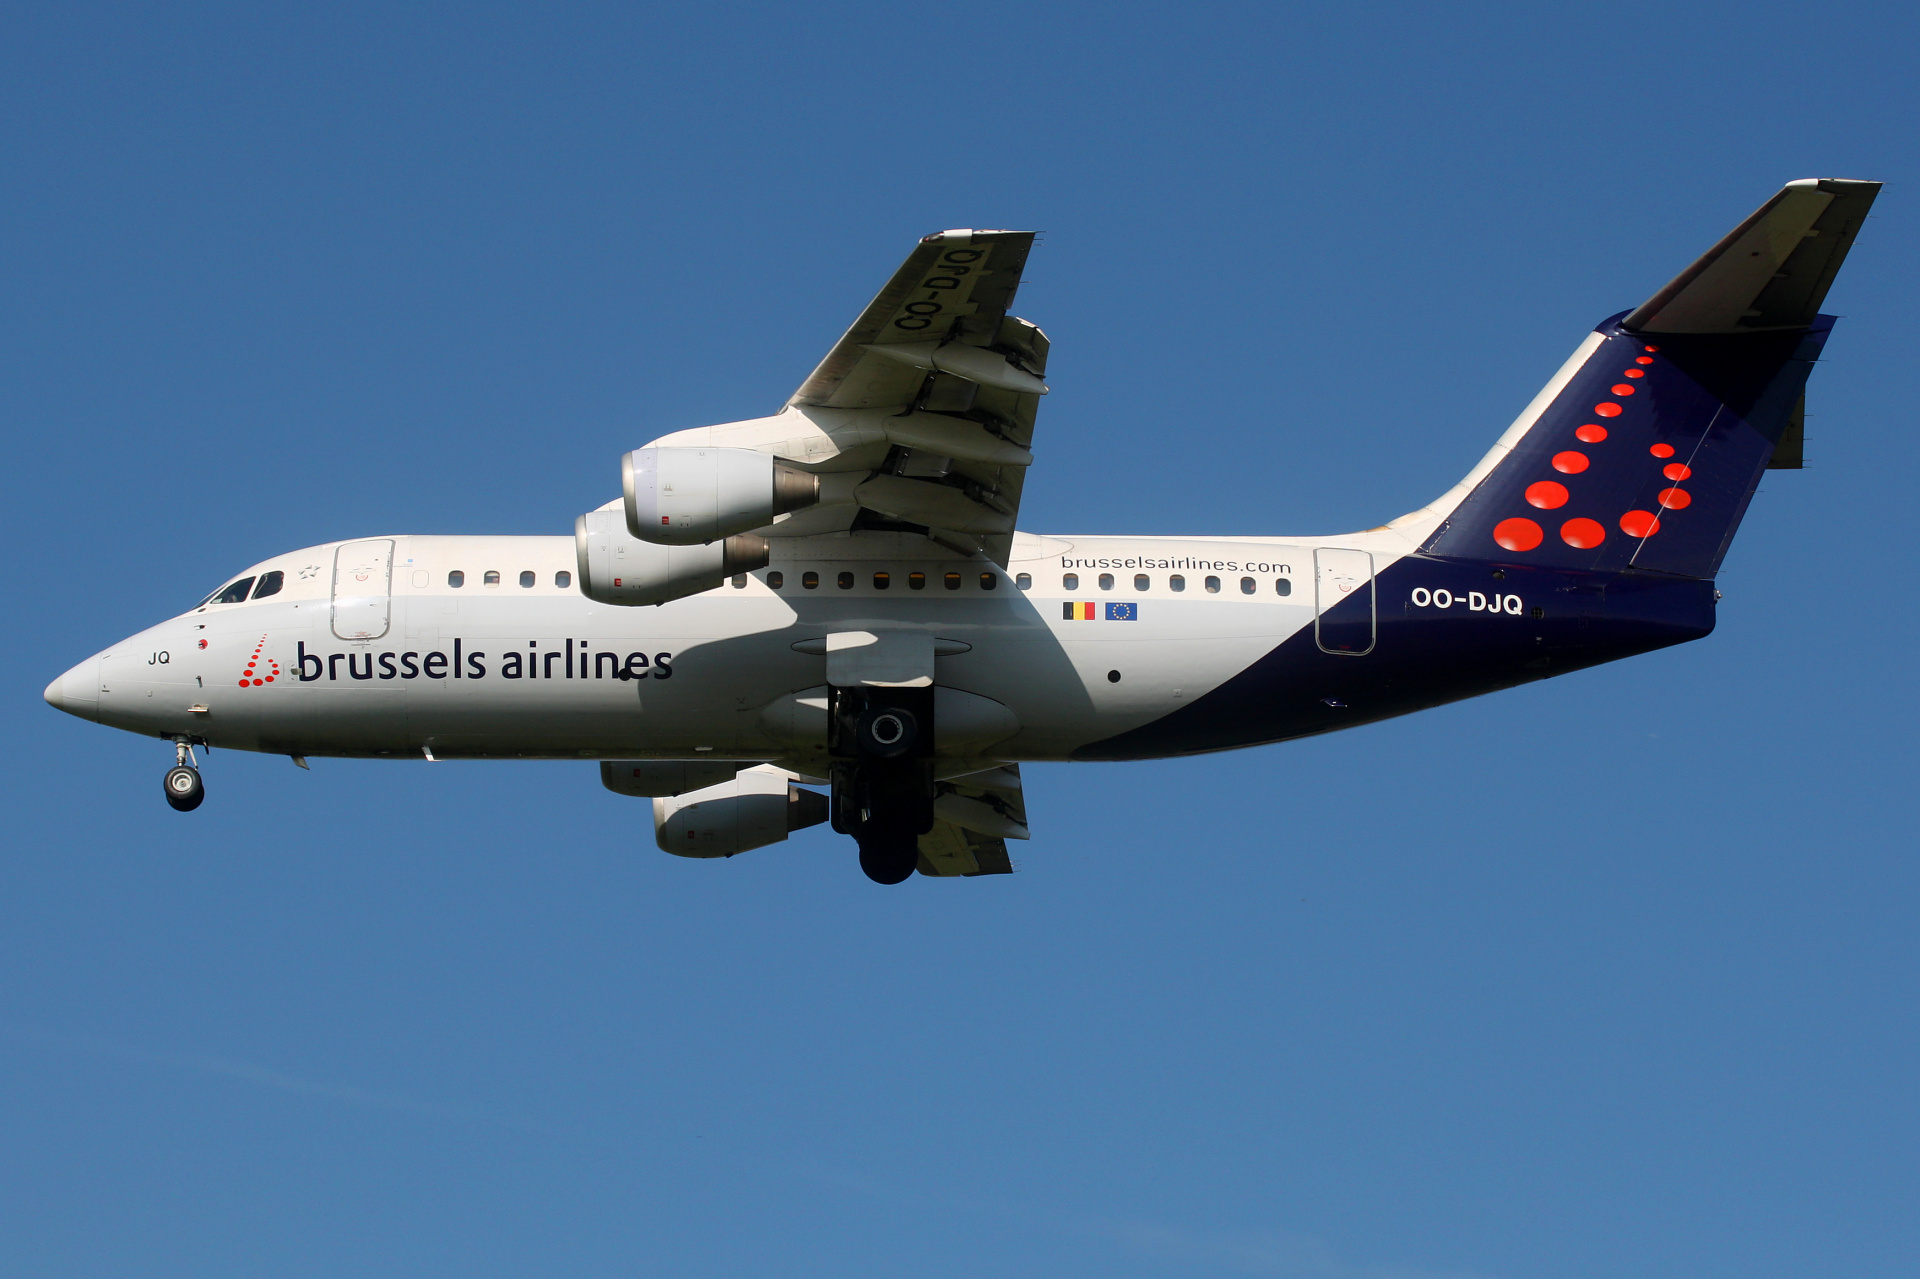 OO-DJQ (Aircraft » EPWA Spotting » BAe 146 and revisions » Avro RJ85 » Brussels Airlines)